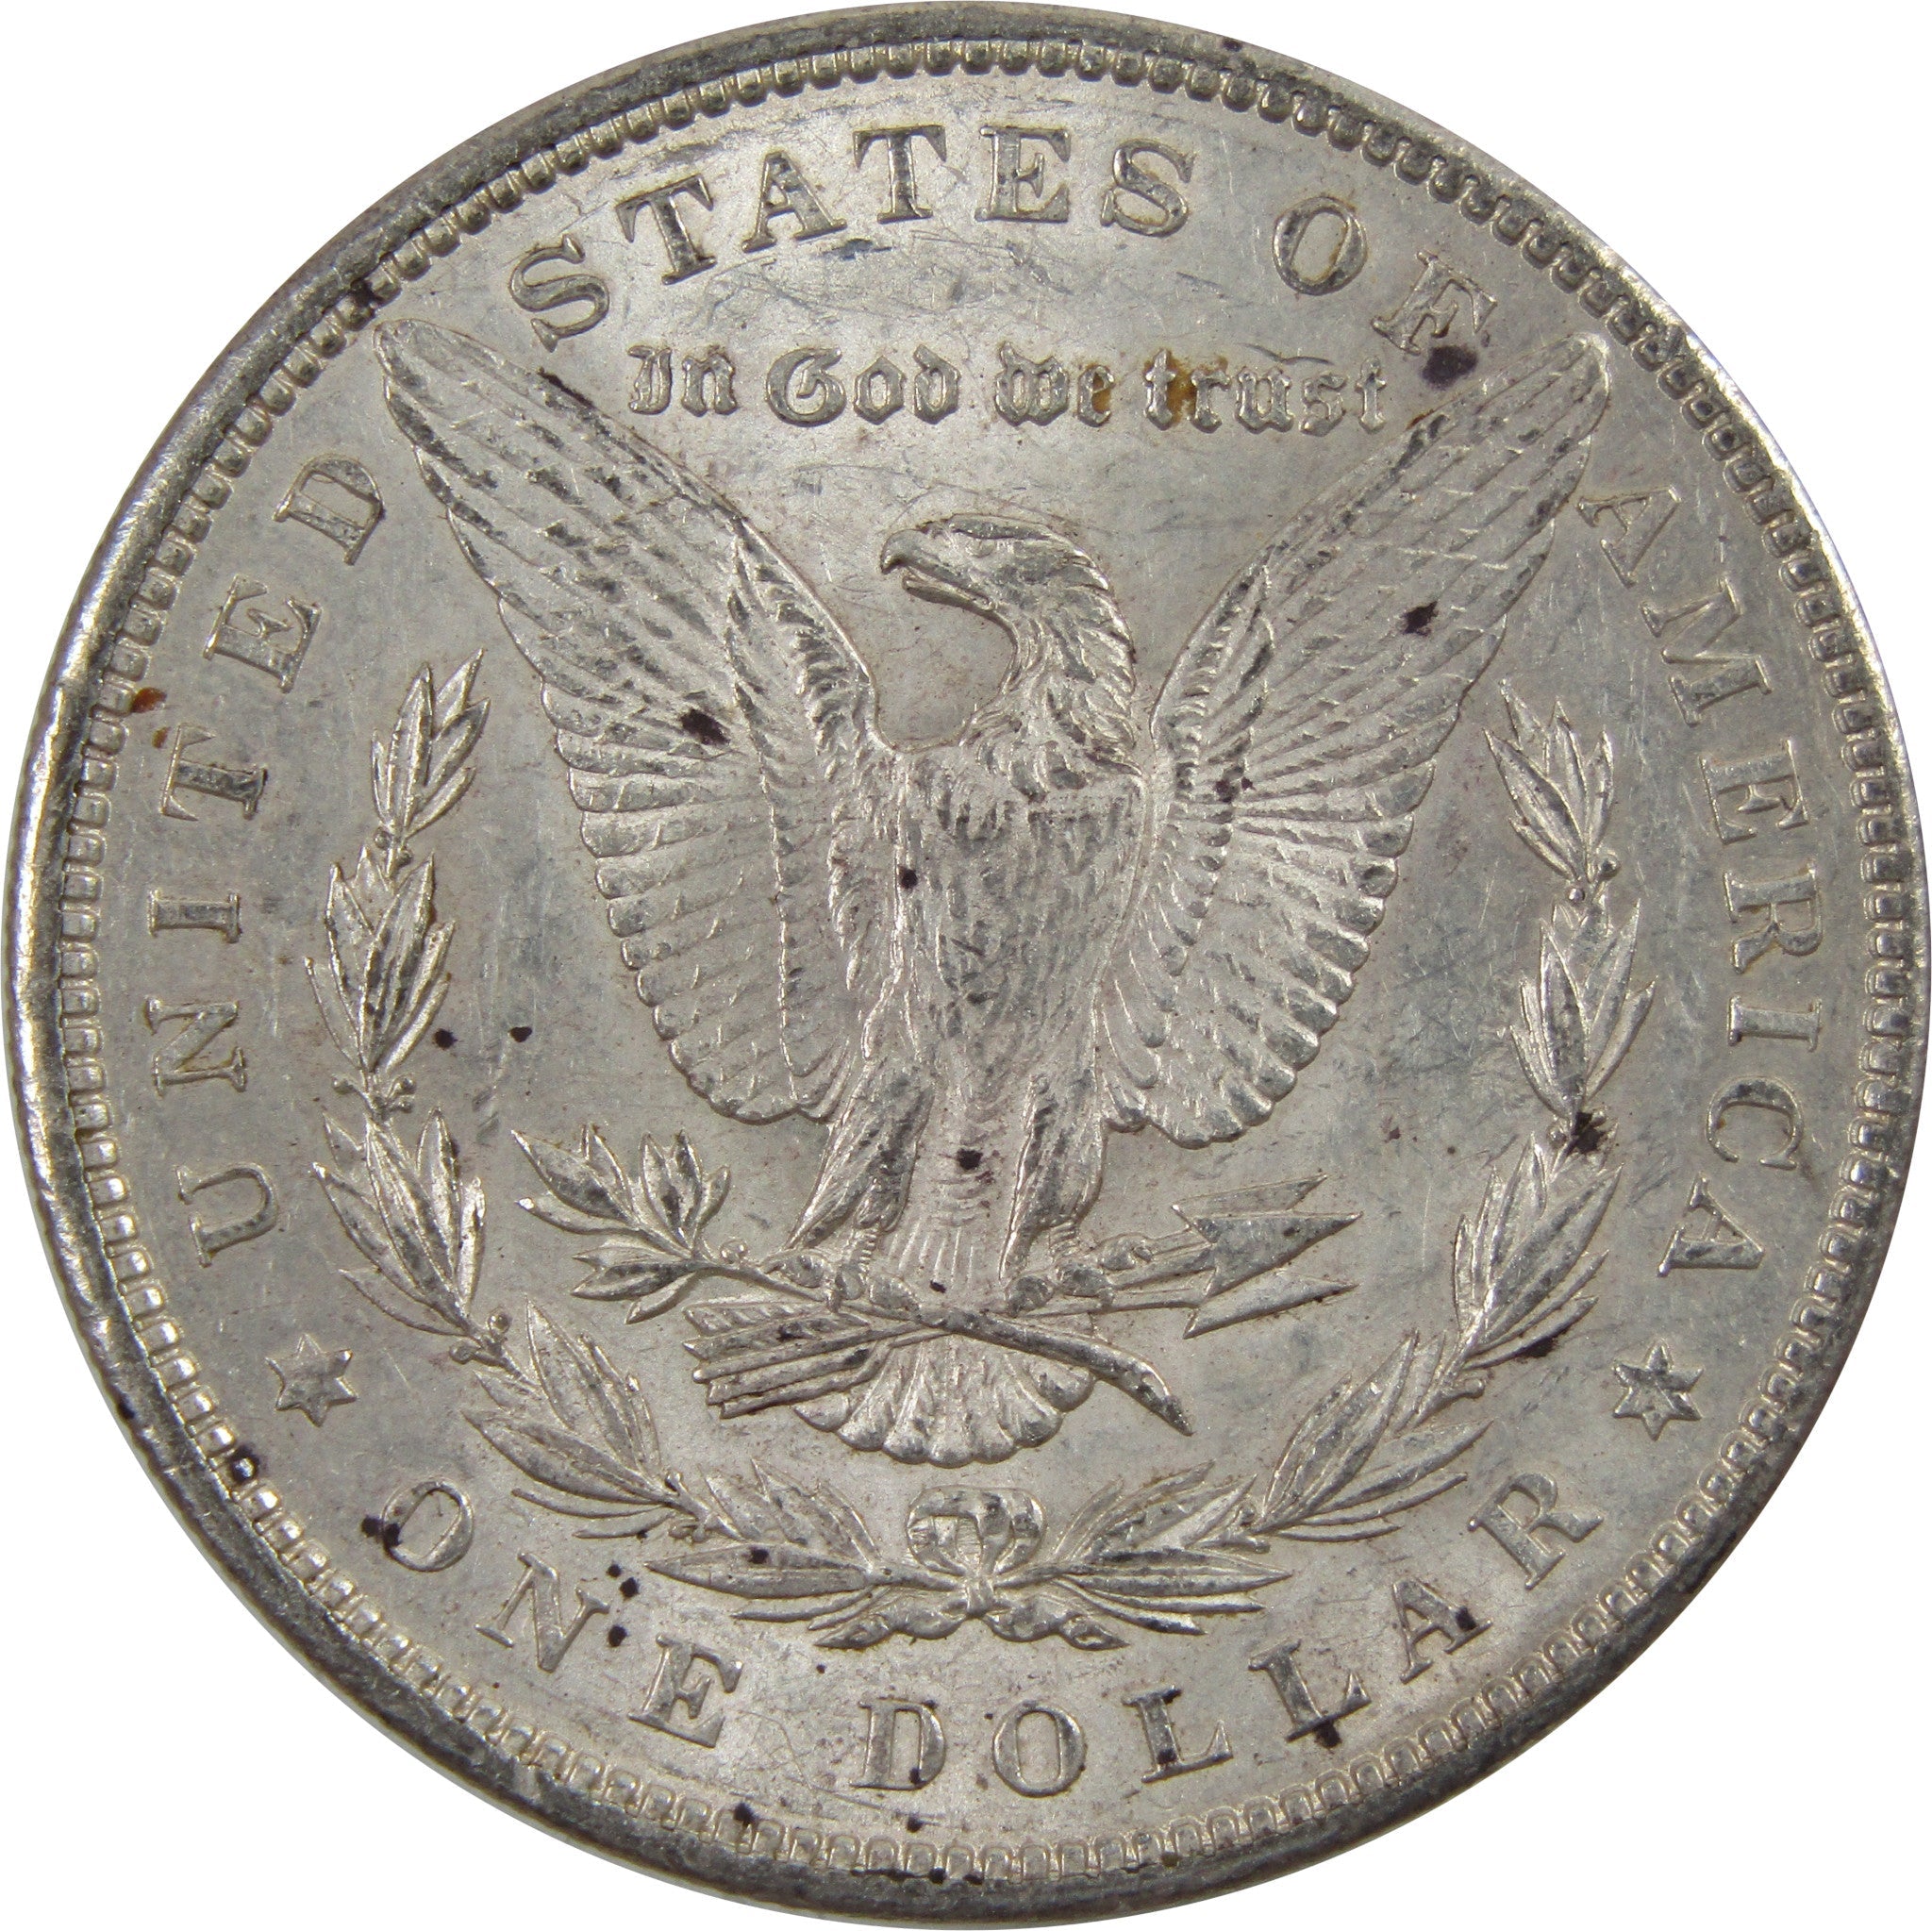 1900 Morgan Dollar AU About Uncirculated 90% Silver $1 Coin SKU:I5471 - Morgan coin - Morgan silver dollar - Morgan silver dollar for sale - Profile Coins &amp; Collectibles